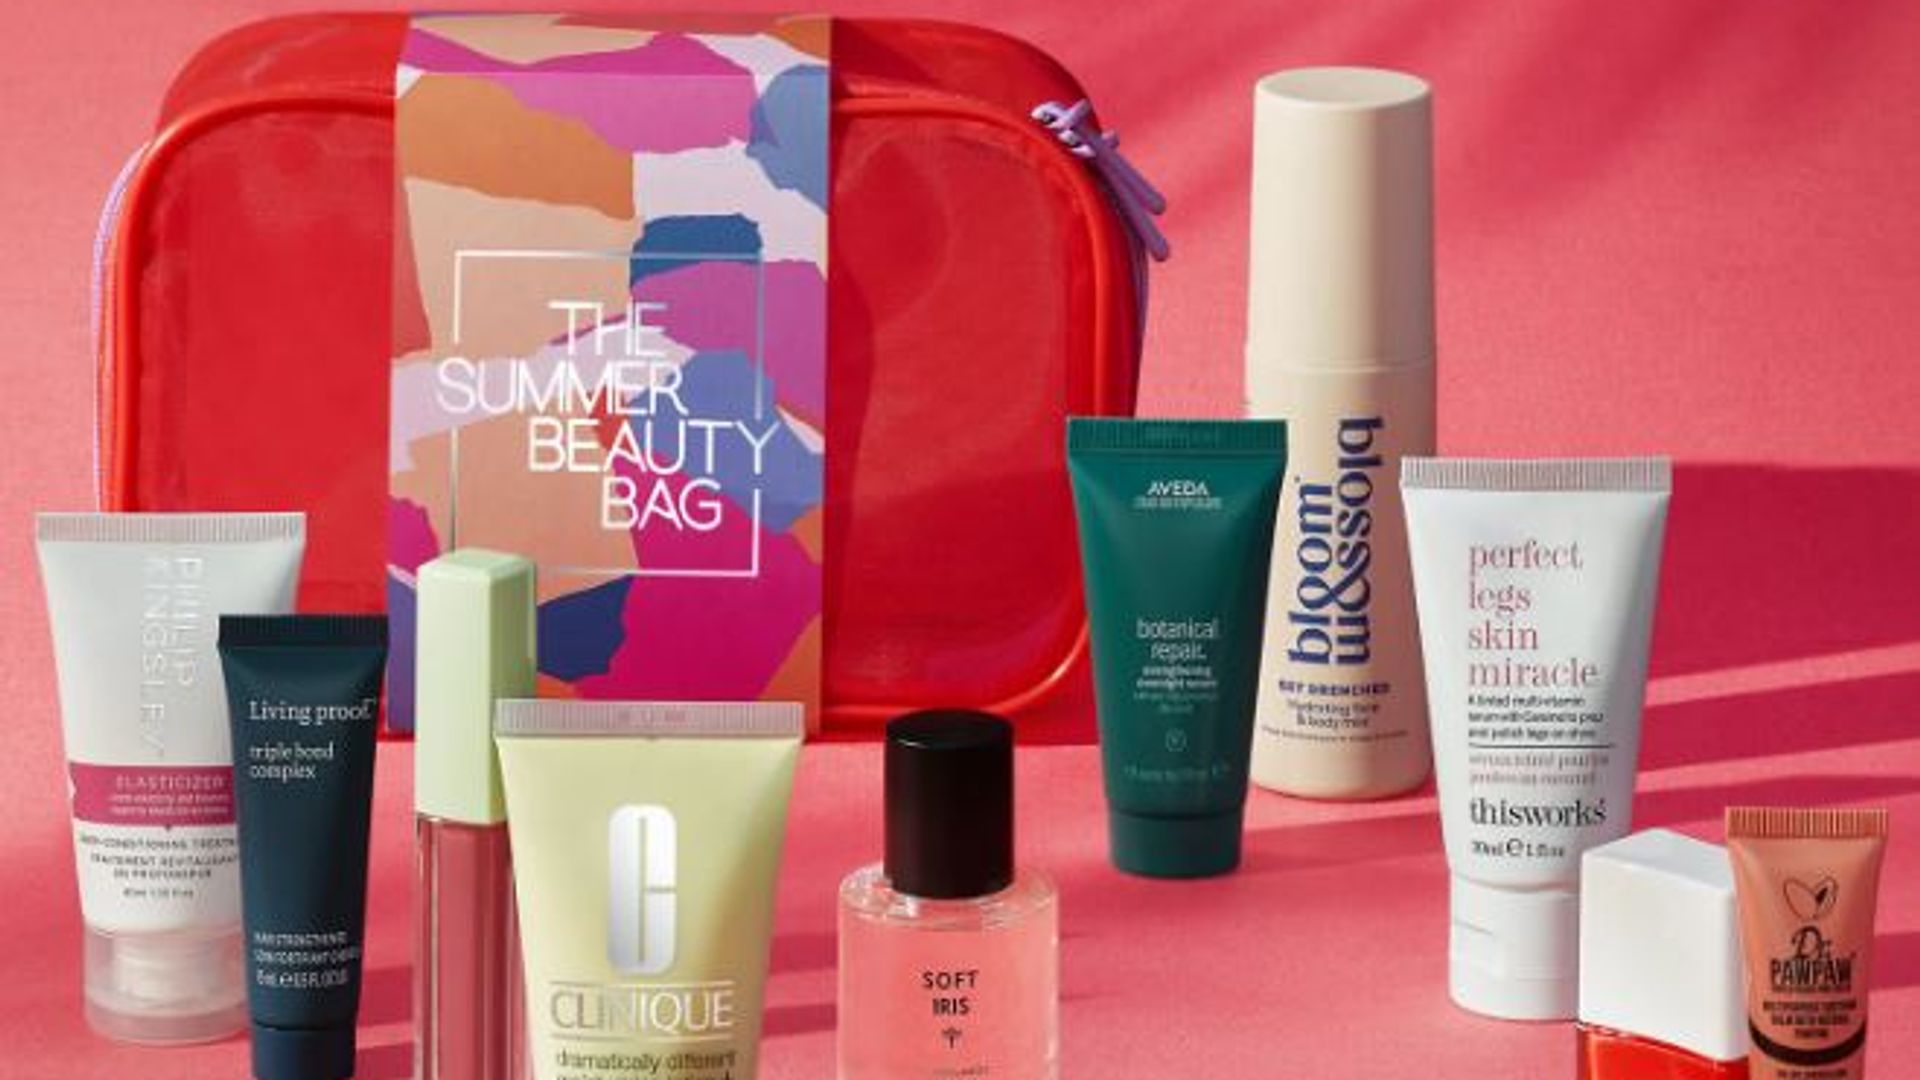 M&S just dropped its £25 Summer Beauty Bag worth £155 and it's going